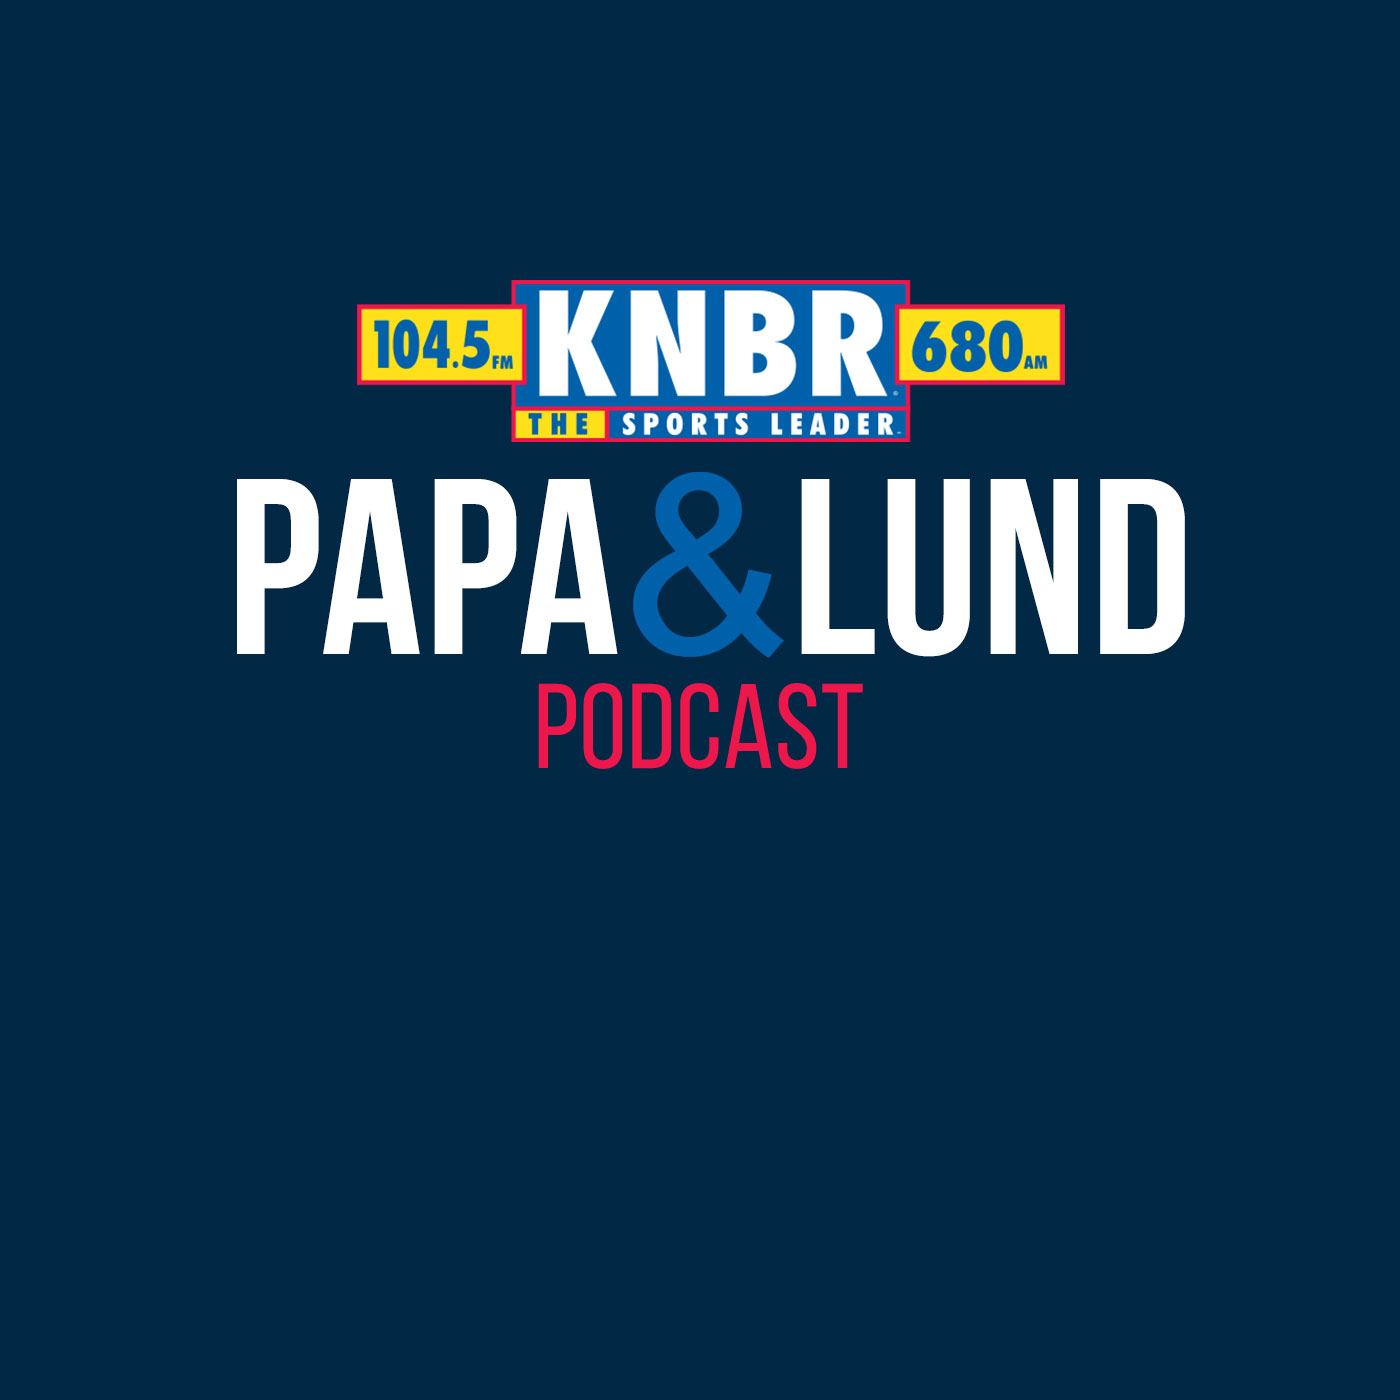 12-1 Warrior's beat writer from the Chronicle, Rusty Simmons joins Papa & Lund: This Suns game felt like a playoff series